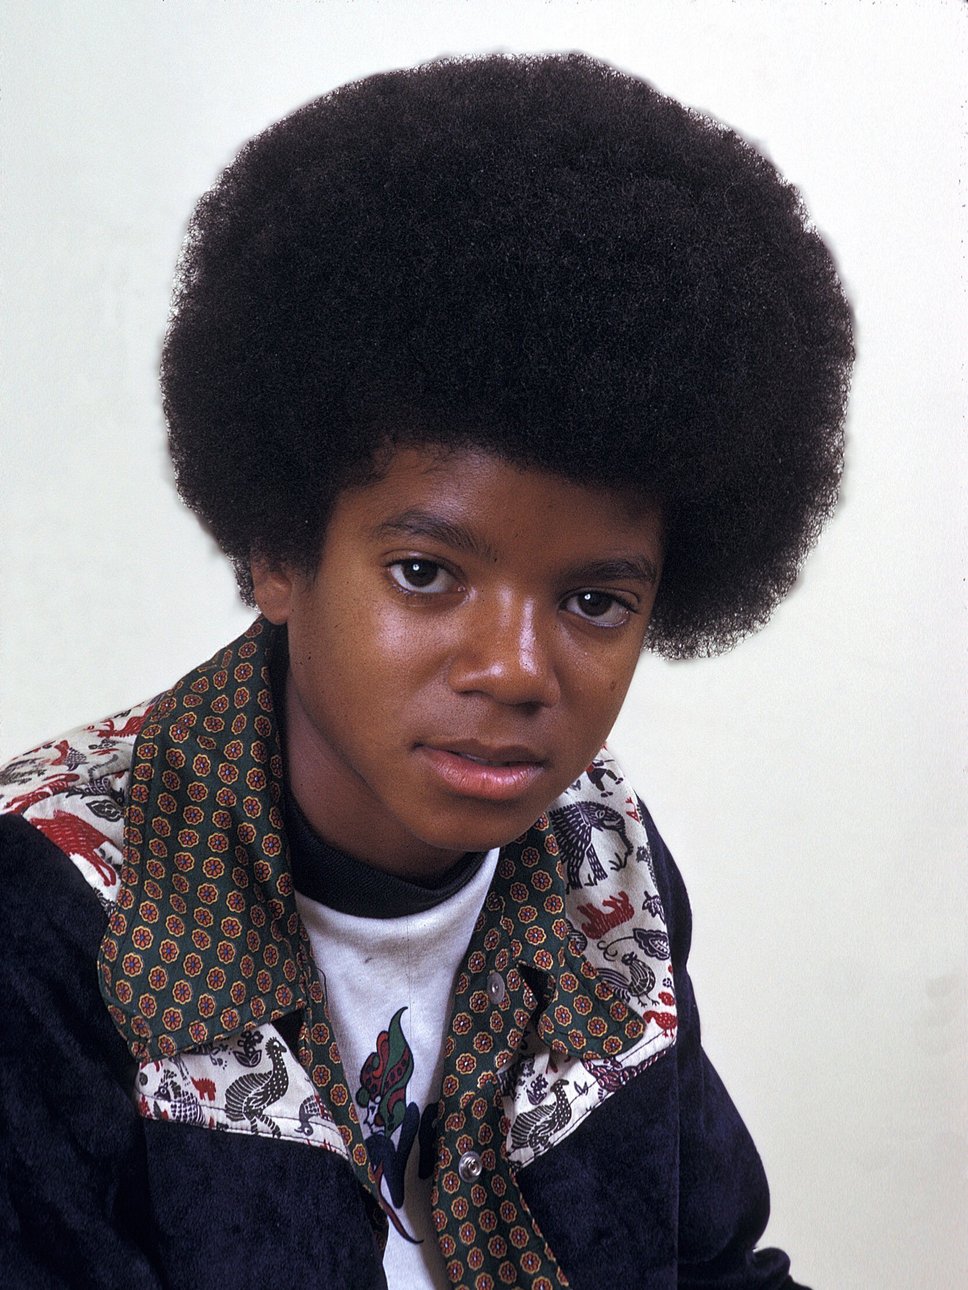 The first song MJ created that hit the top of the Billboard Hot 100 chart was 'Ben' in 1972.